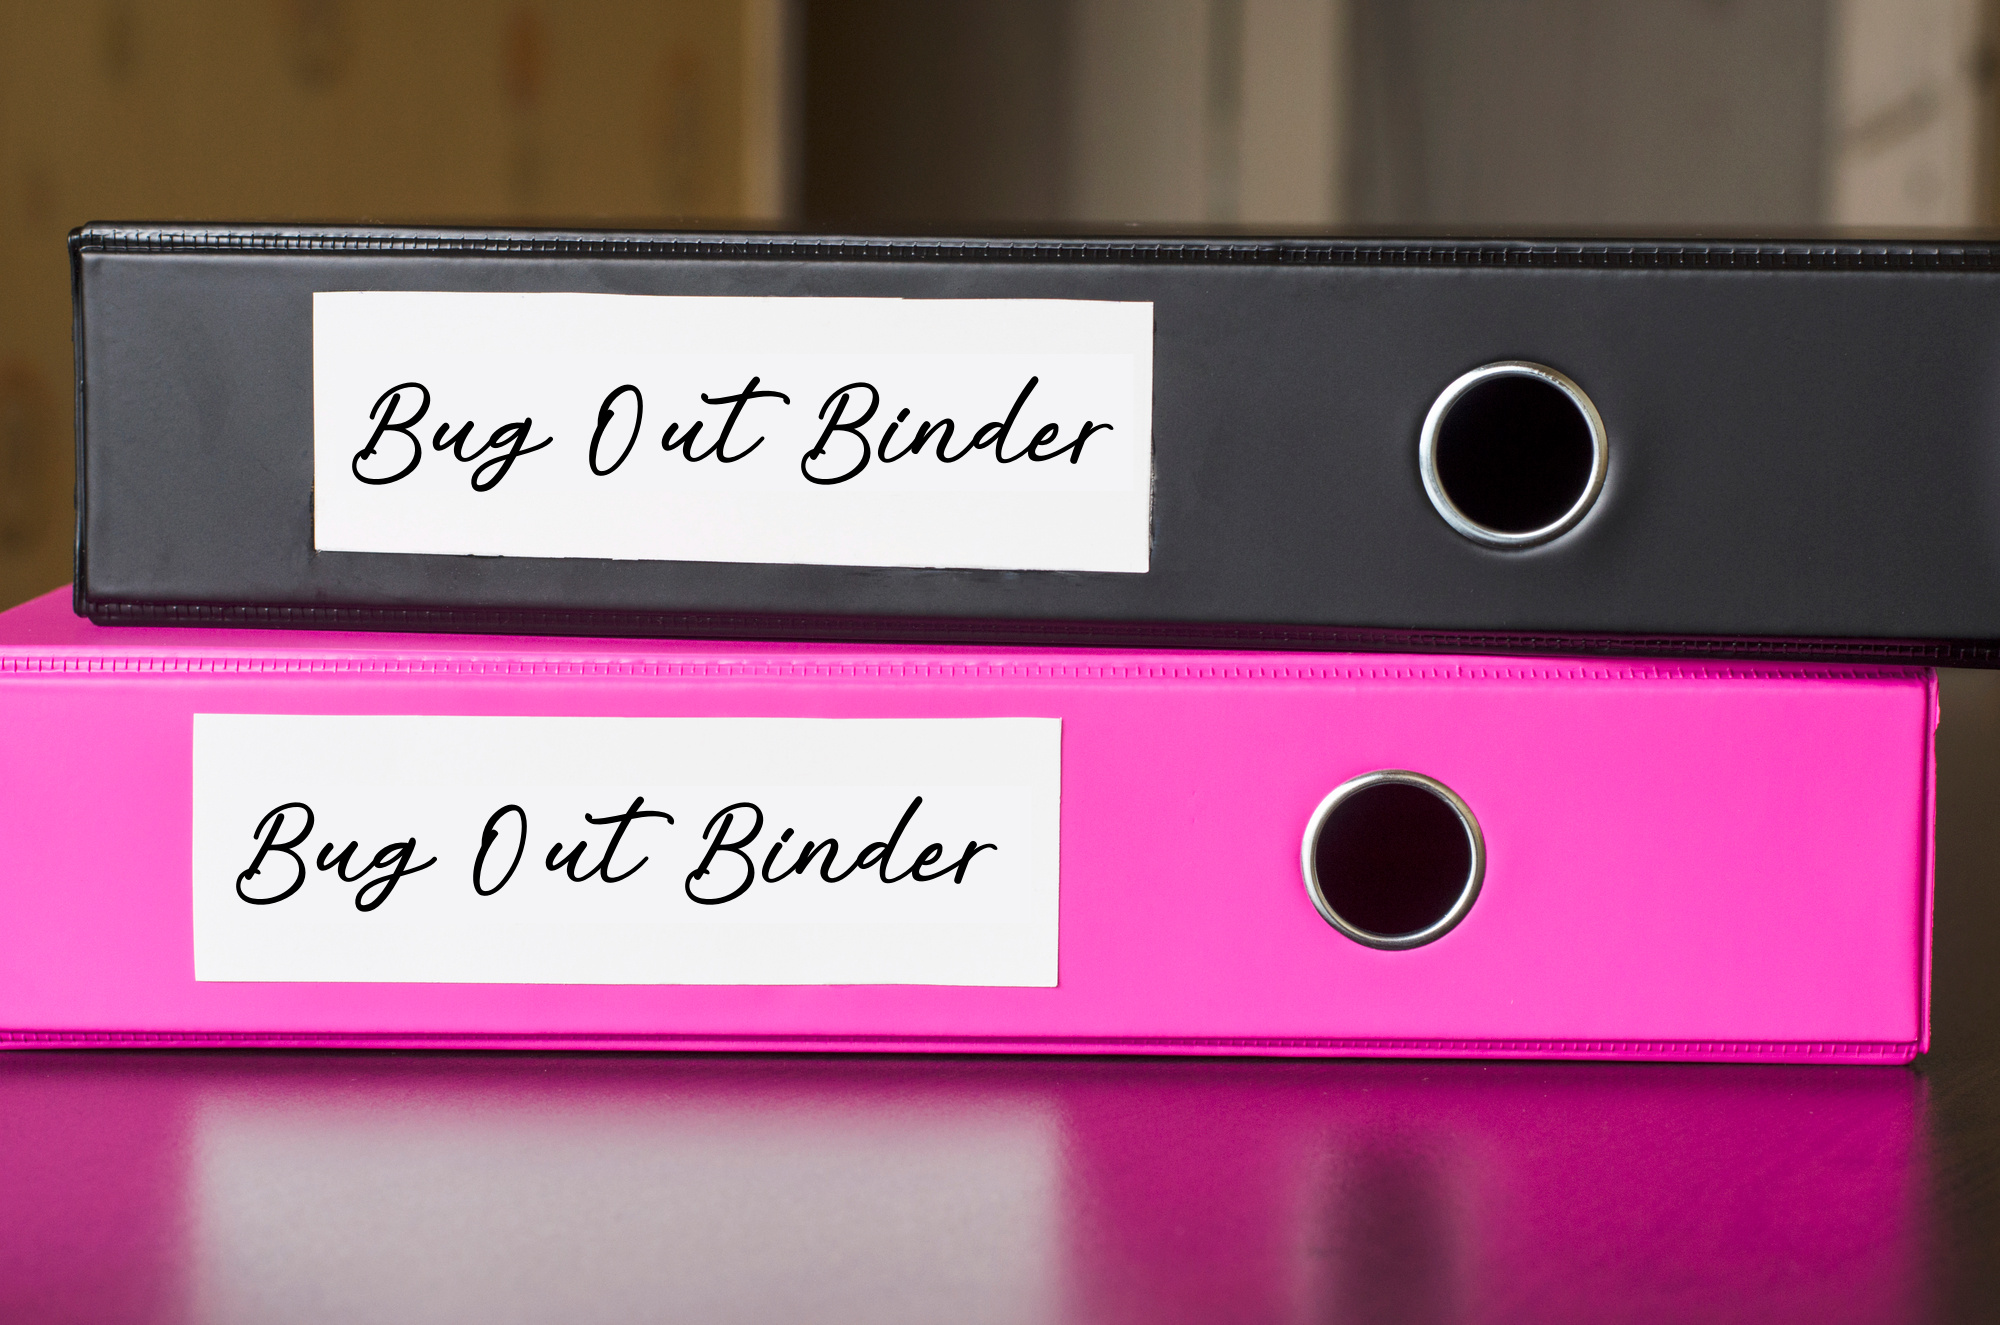 This Viral ‘Bug-Out Binder’ Is The Emergency Binder Your Family Needs. Here’s How To Make One.